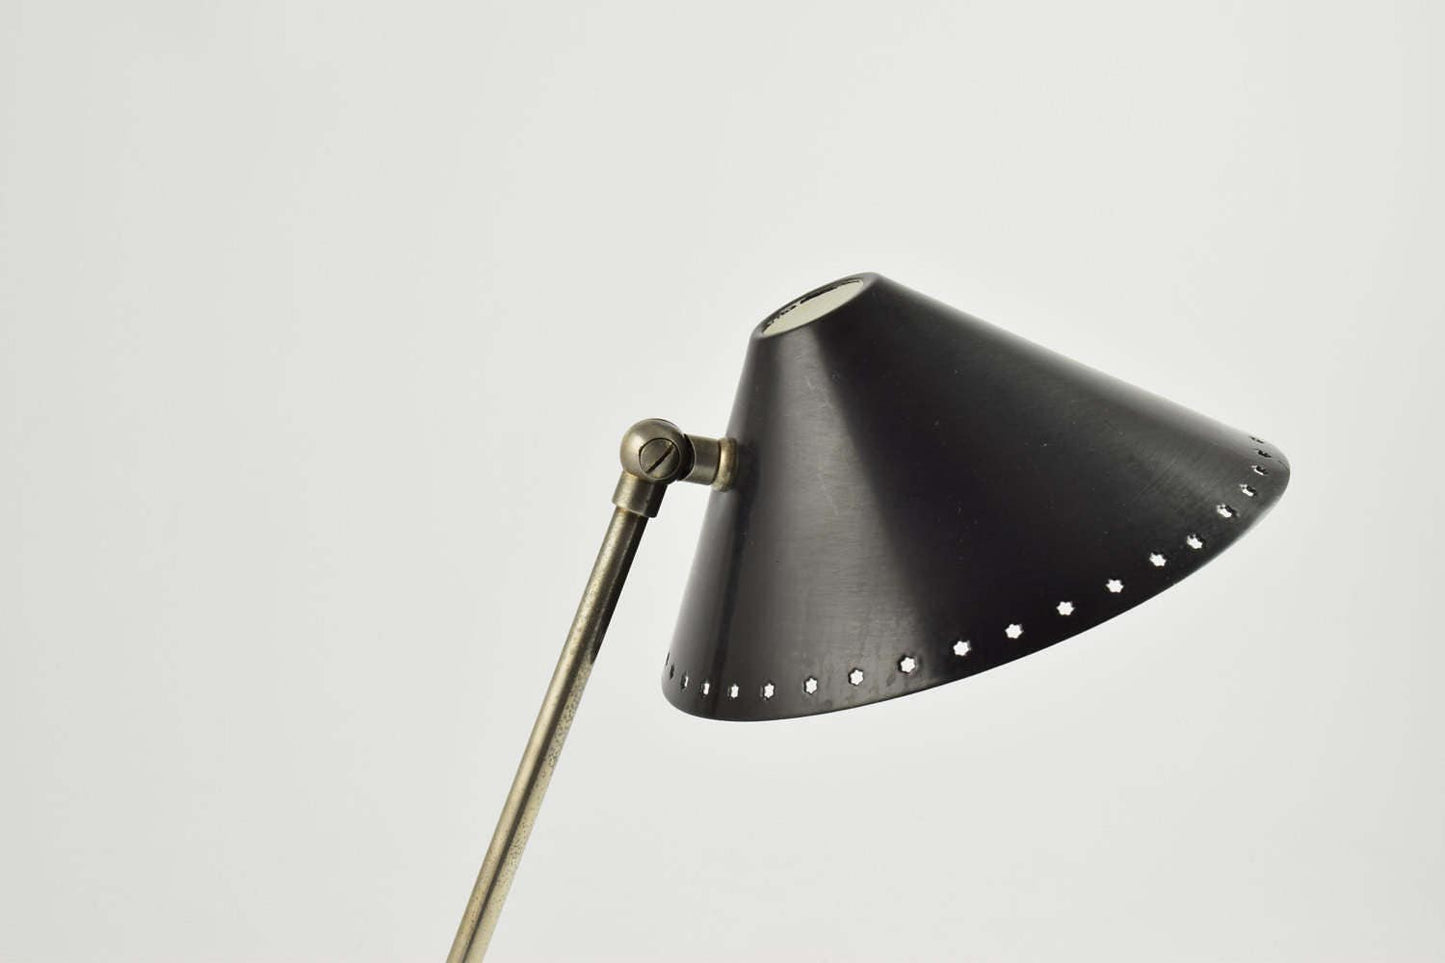 Pinocchio lamp or pinokkio lamp by H.Busquet from hala minimalist industrial icon from the fifties